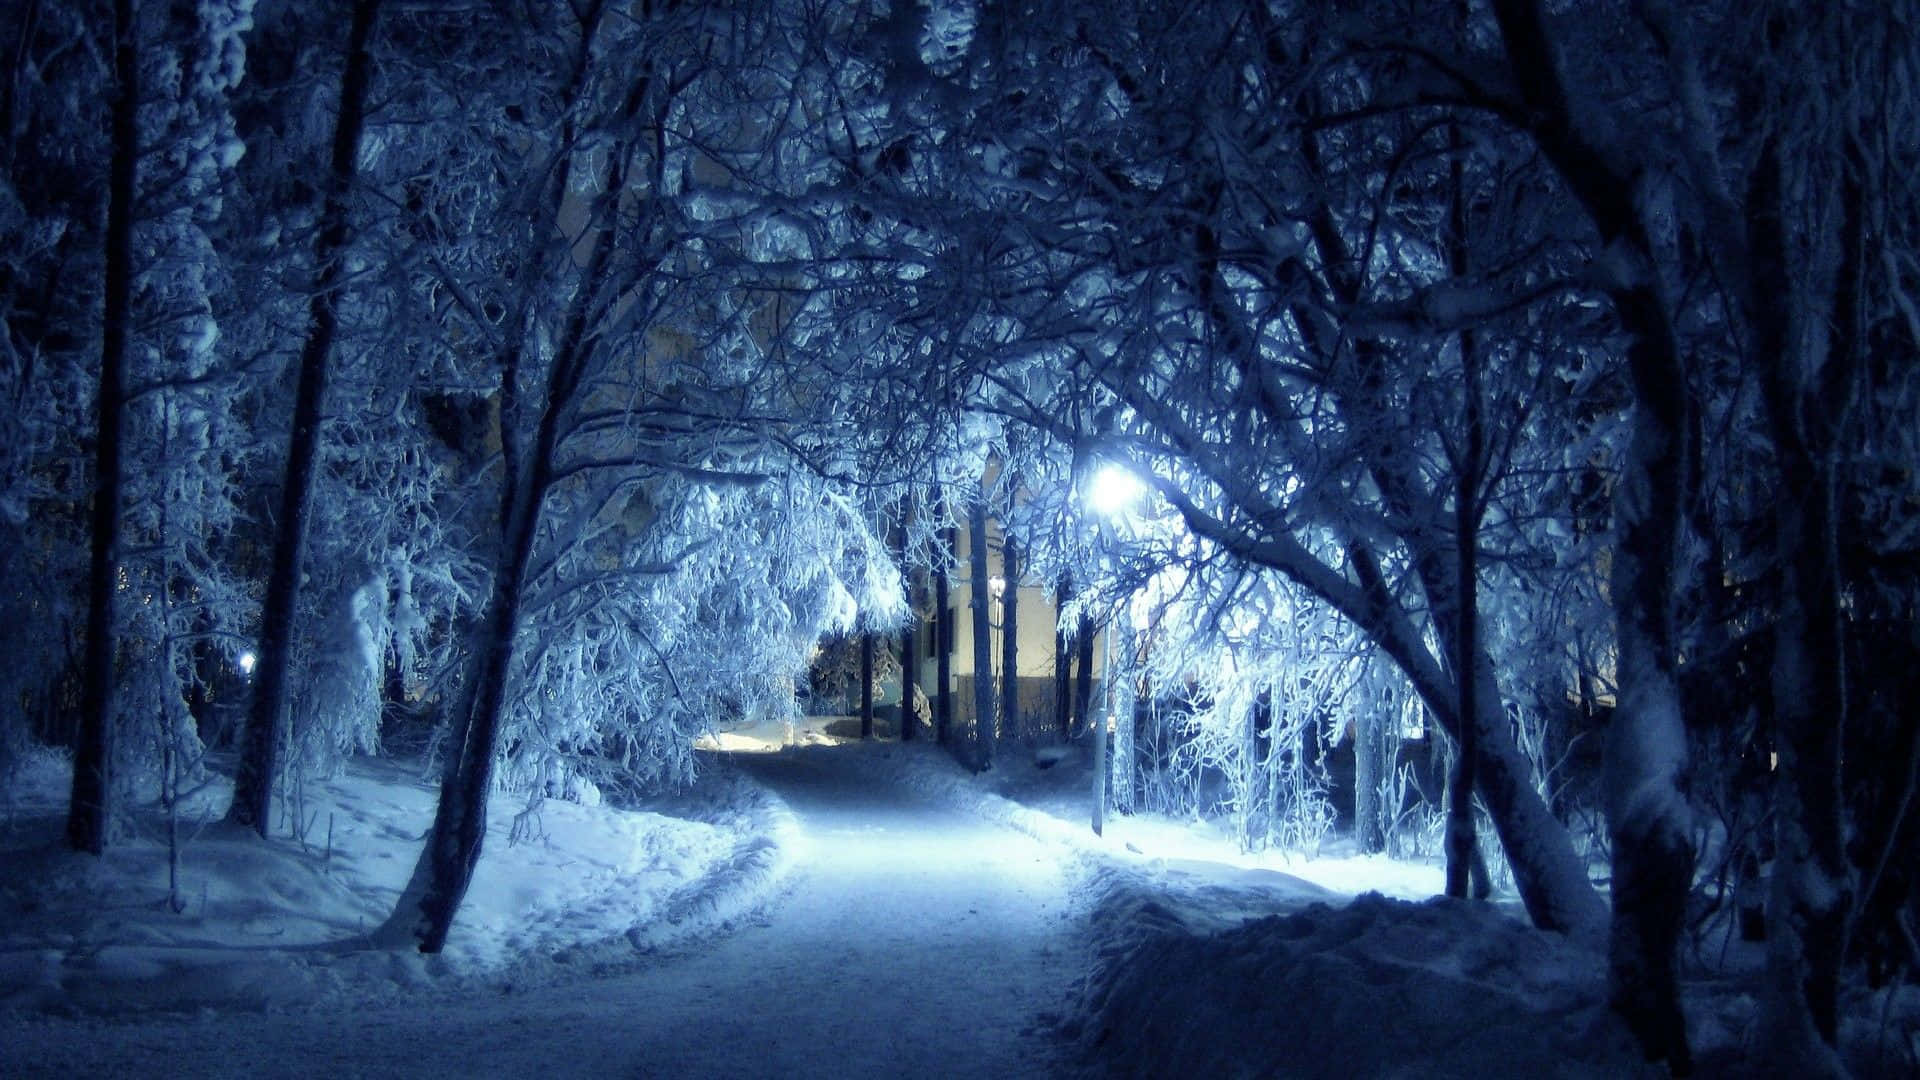 A Snowy Path With Trees And Lights